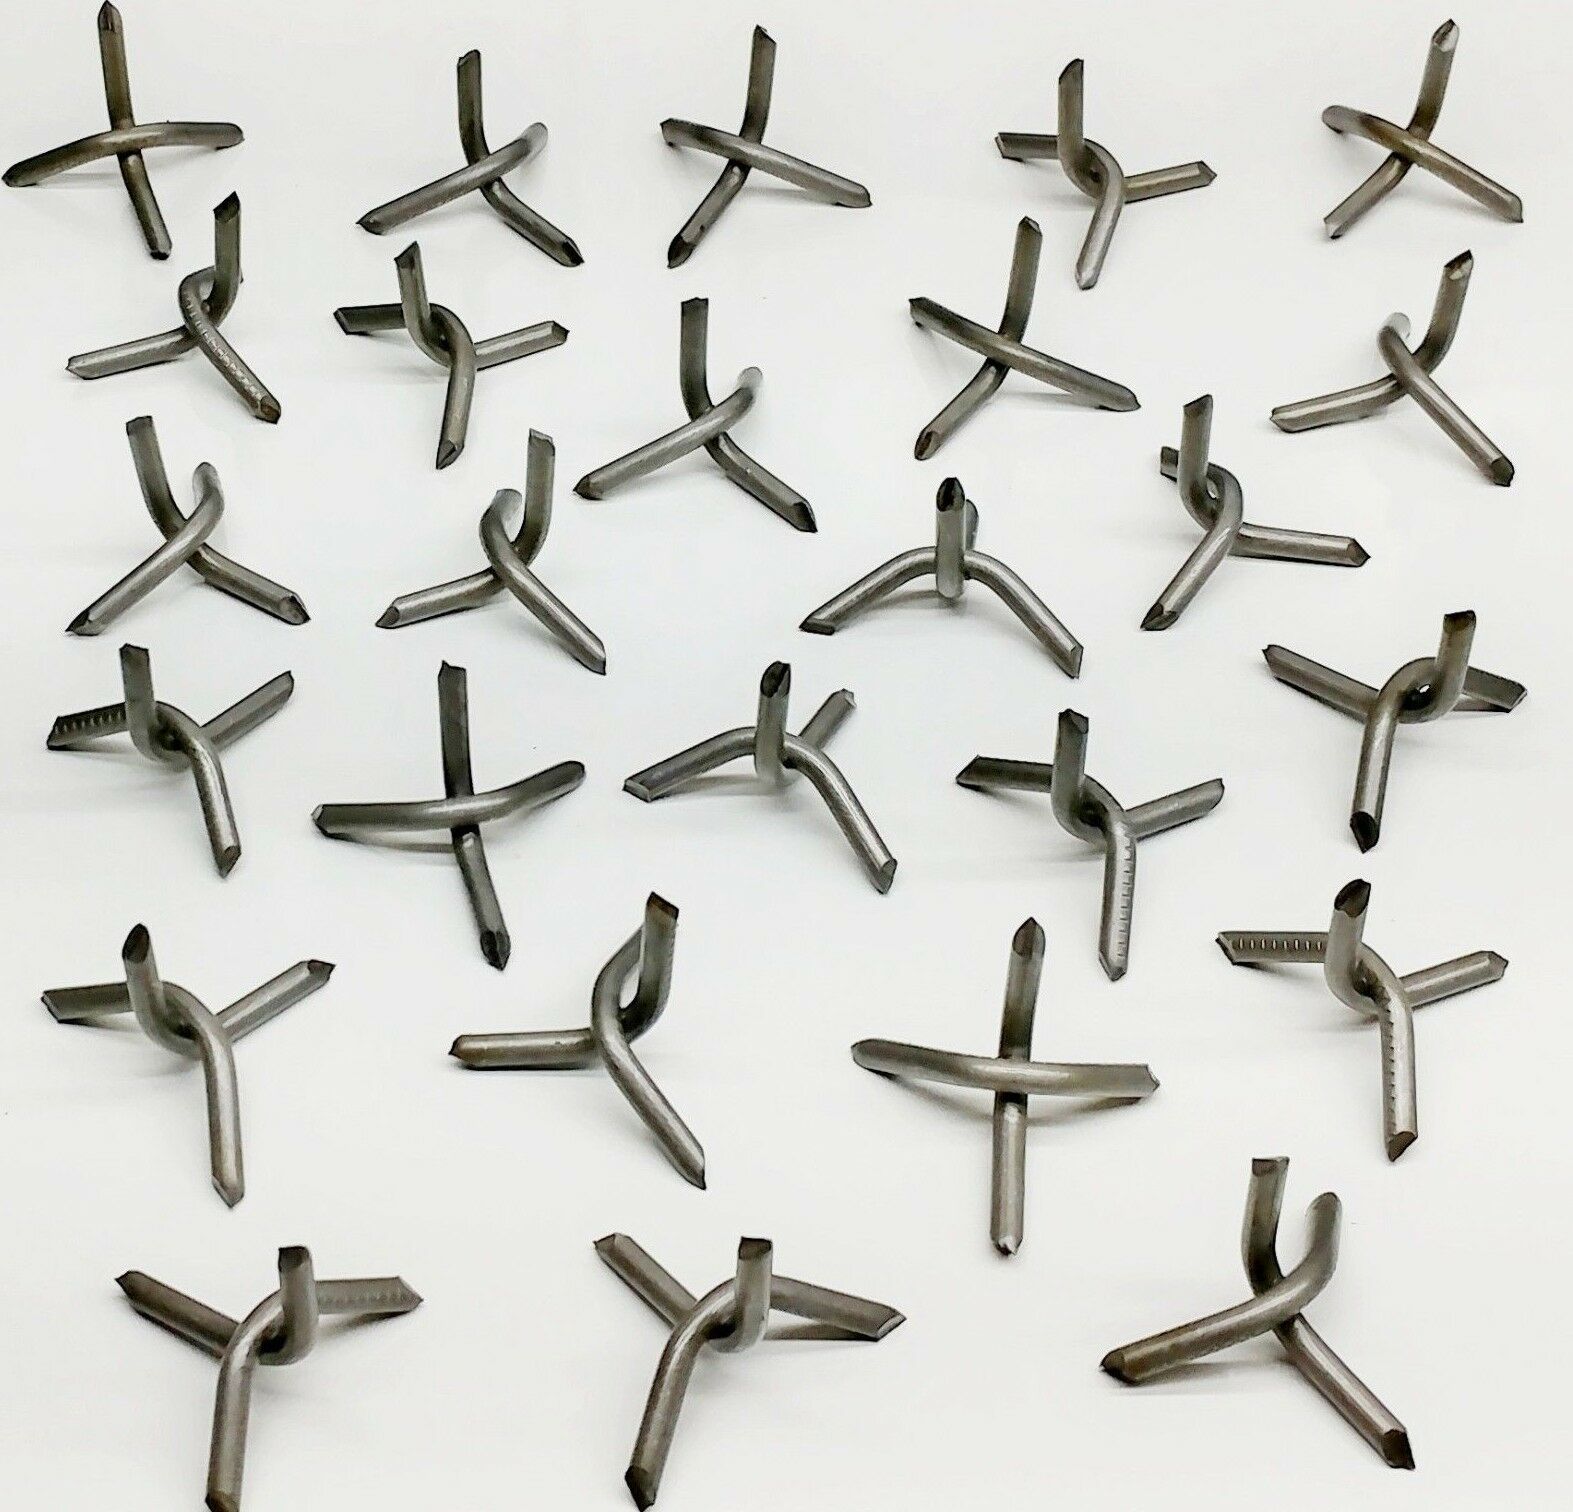 10 Small Caltrops - Road Tire Spikes Stars Immobilizers - 5 Colors - Heavy Steel